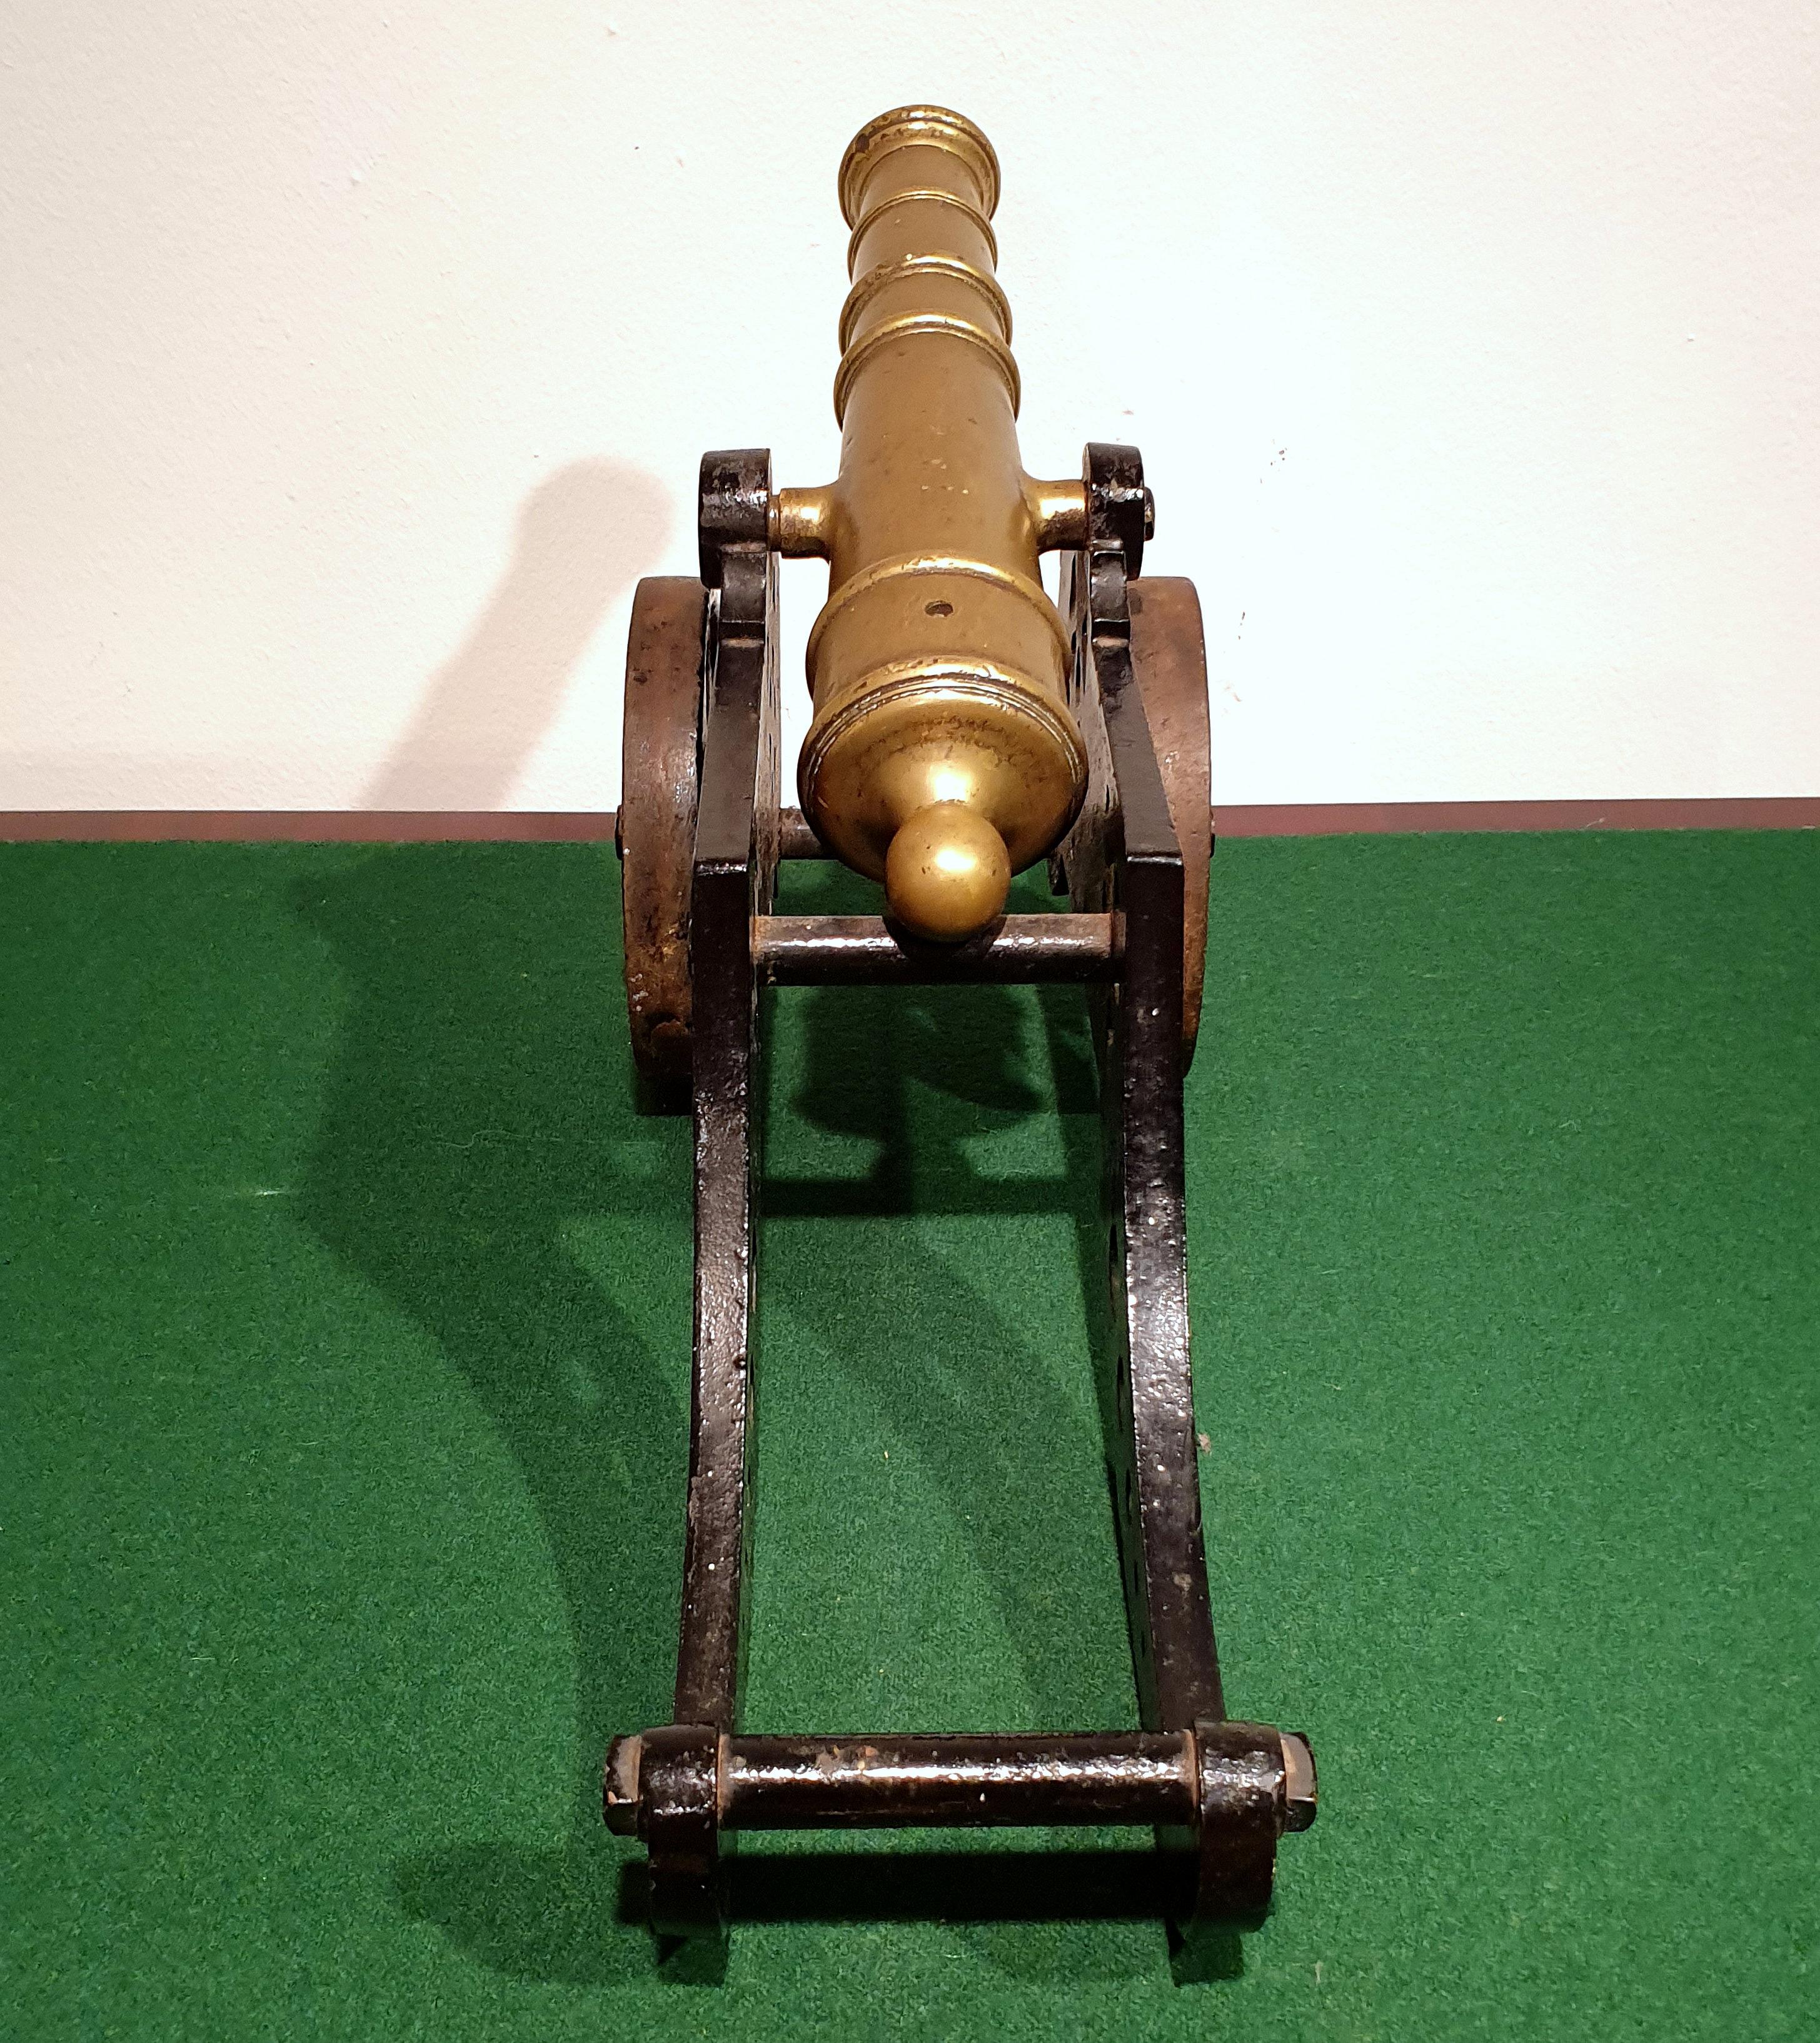 Early 20th Century English Model of a Starting Cannon In Good Condition For Sale In London, GB